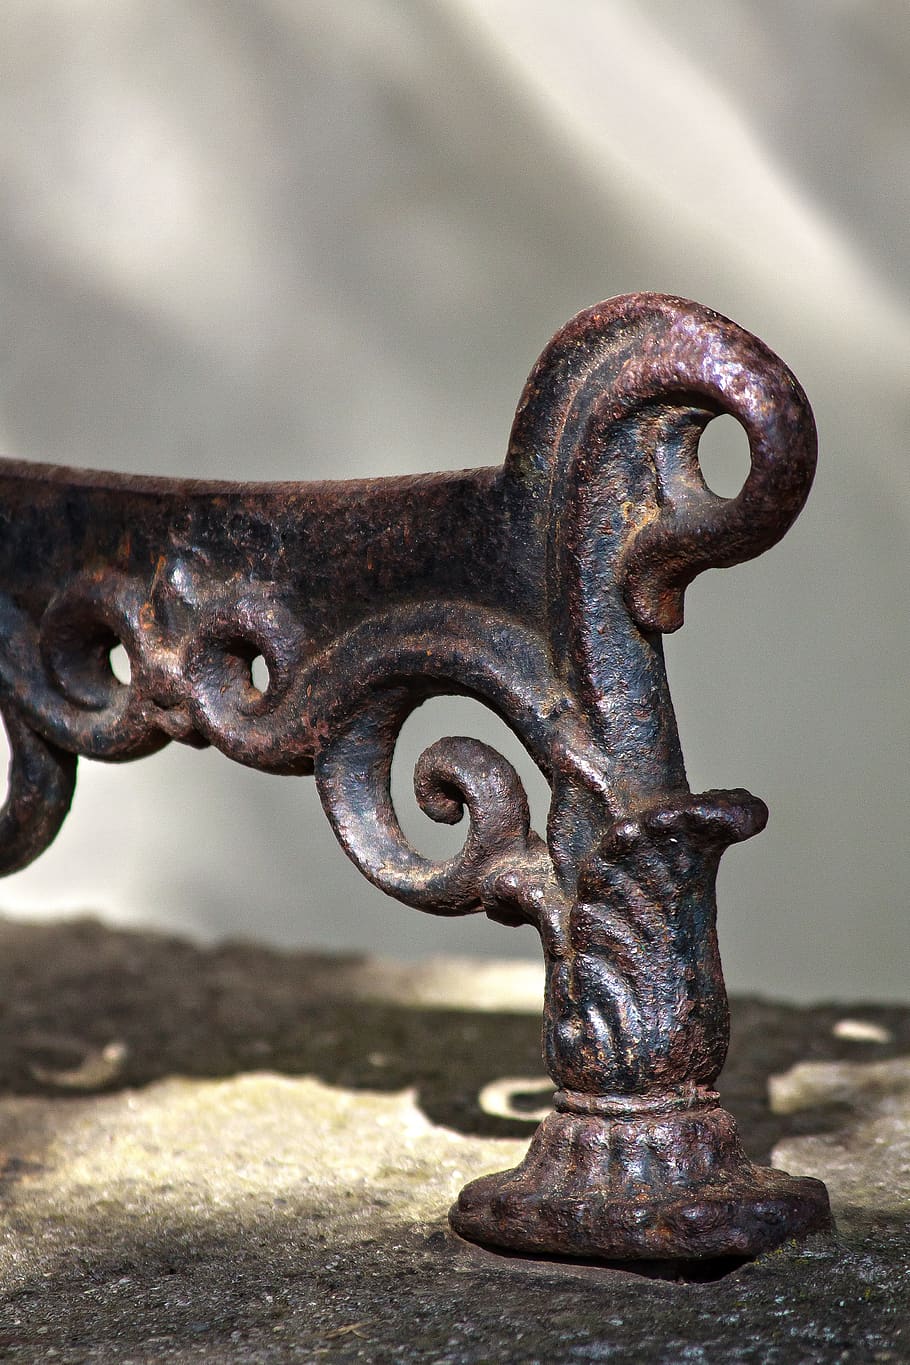 shoe scraper, old, antique, metal, rusty, focus on foreground, close-up, day, iron, strength